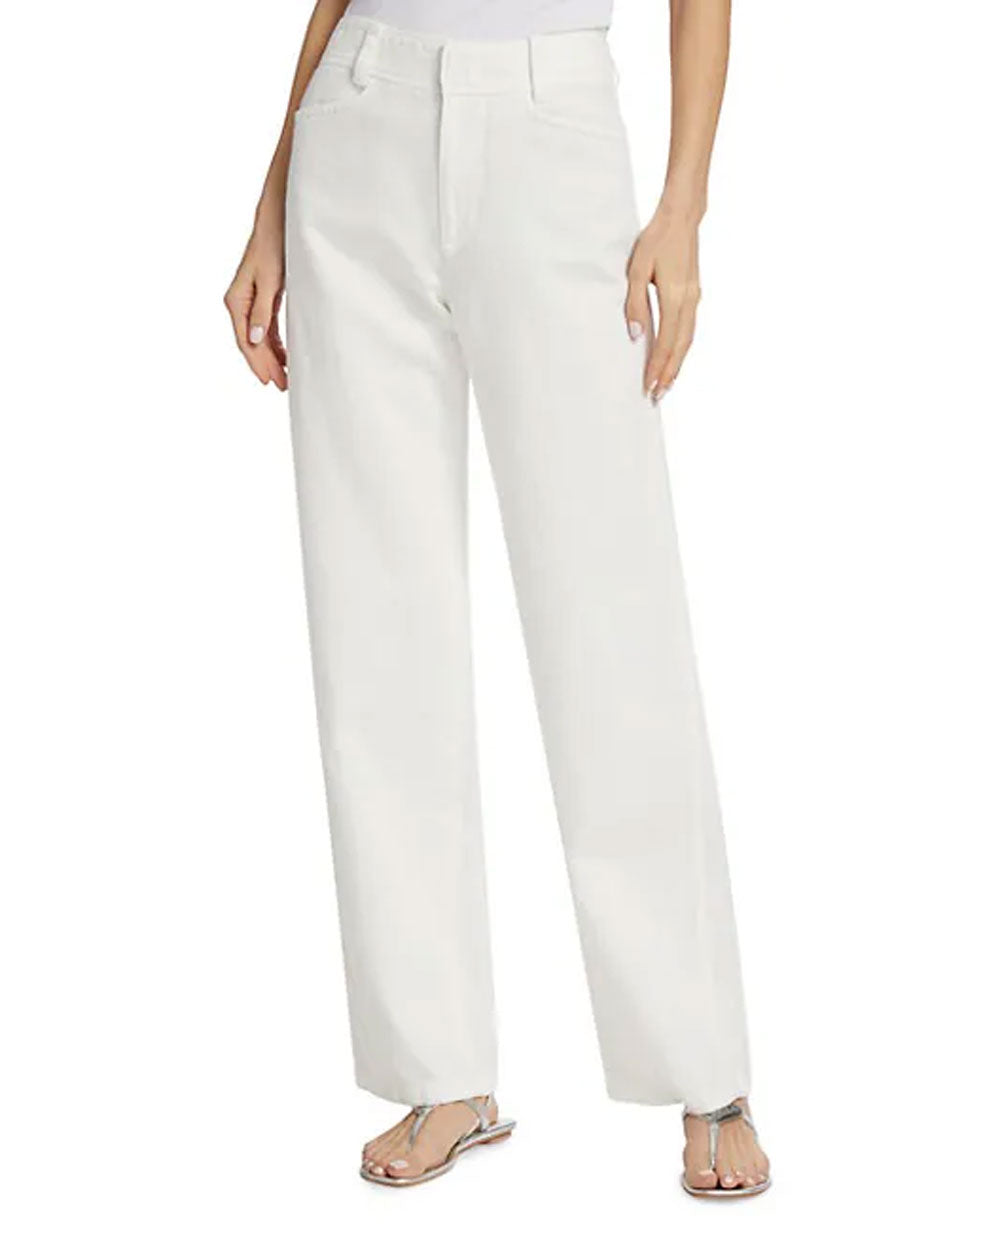 Off White High Waist Casual Pant